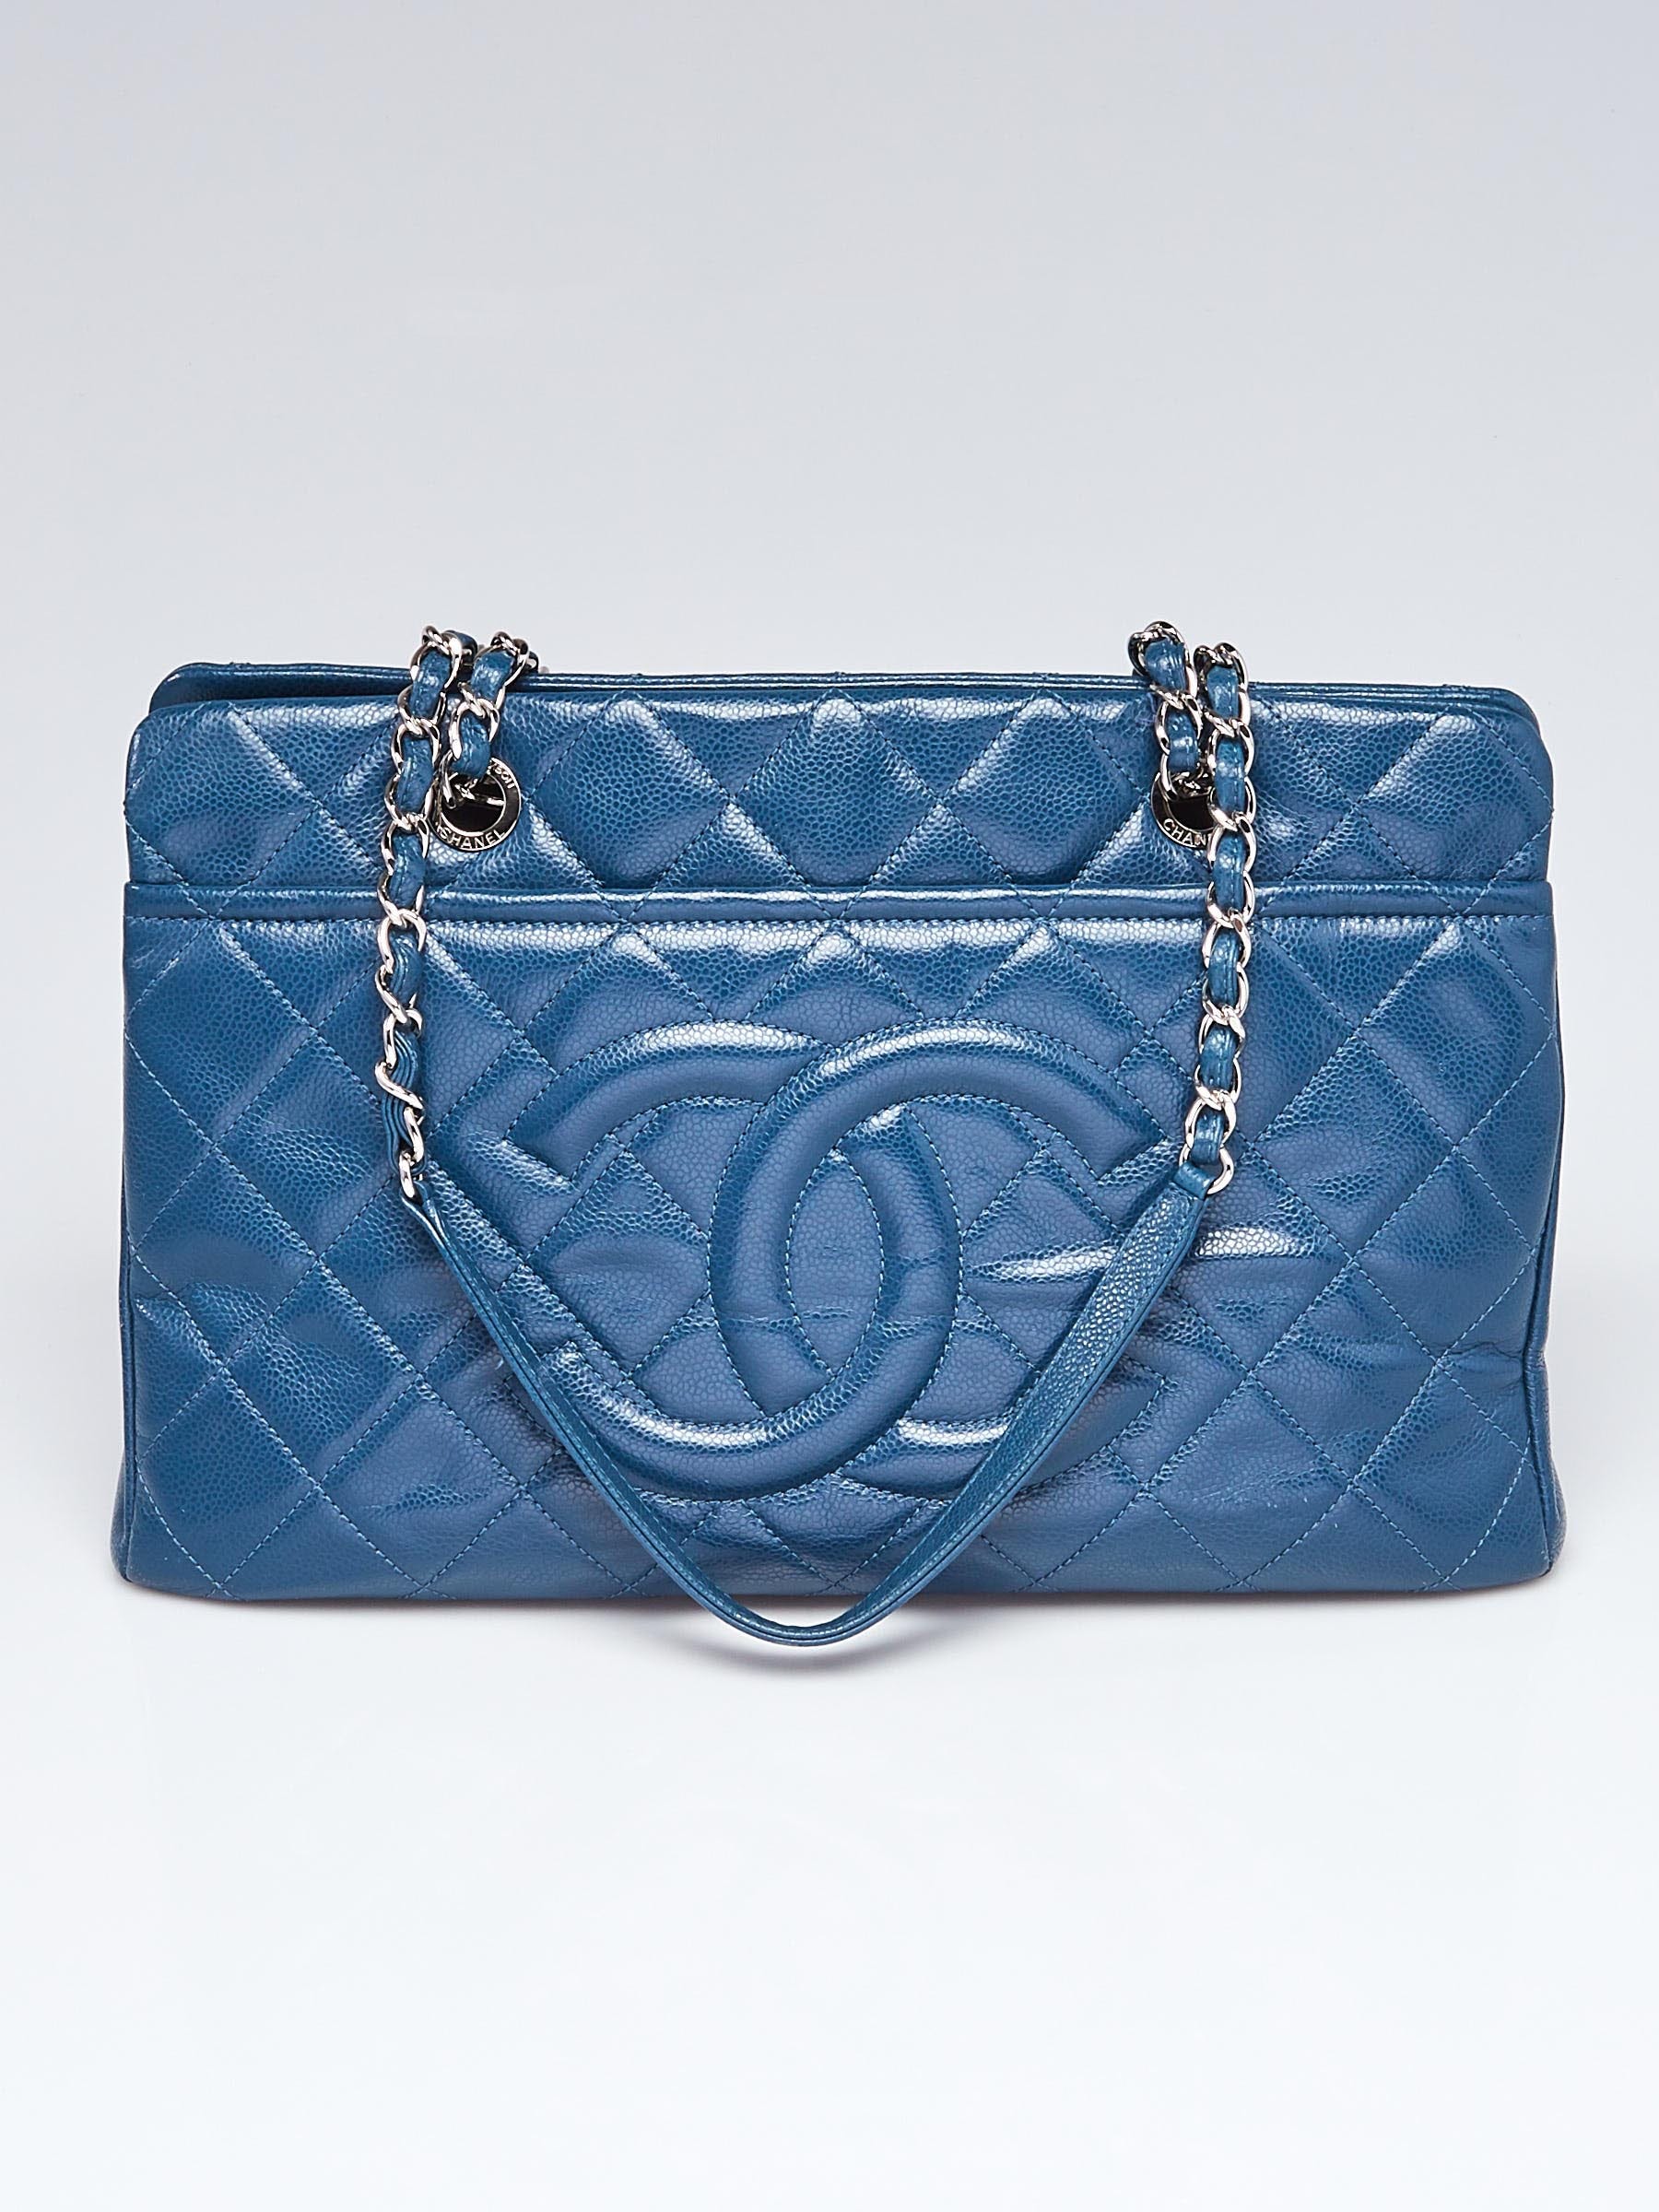 Chanel Blue Quilted Caviar Leather Timeless CC Soft Shopping Large